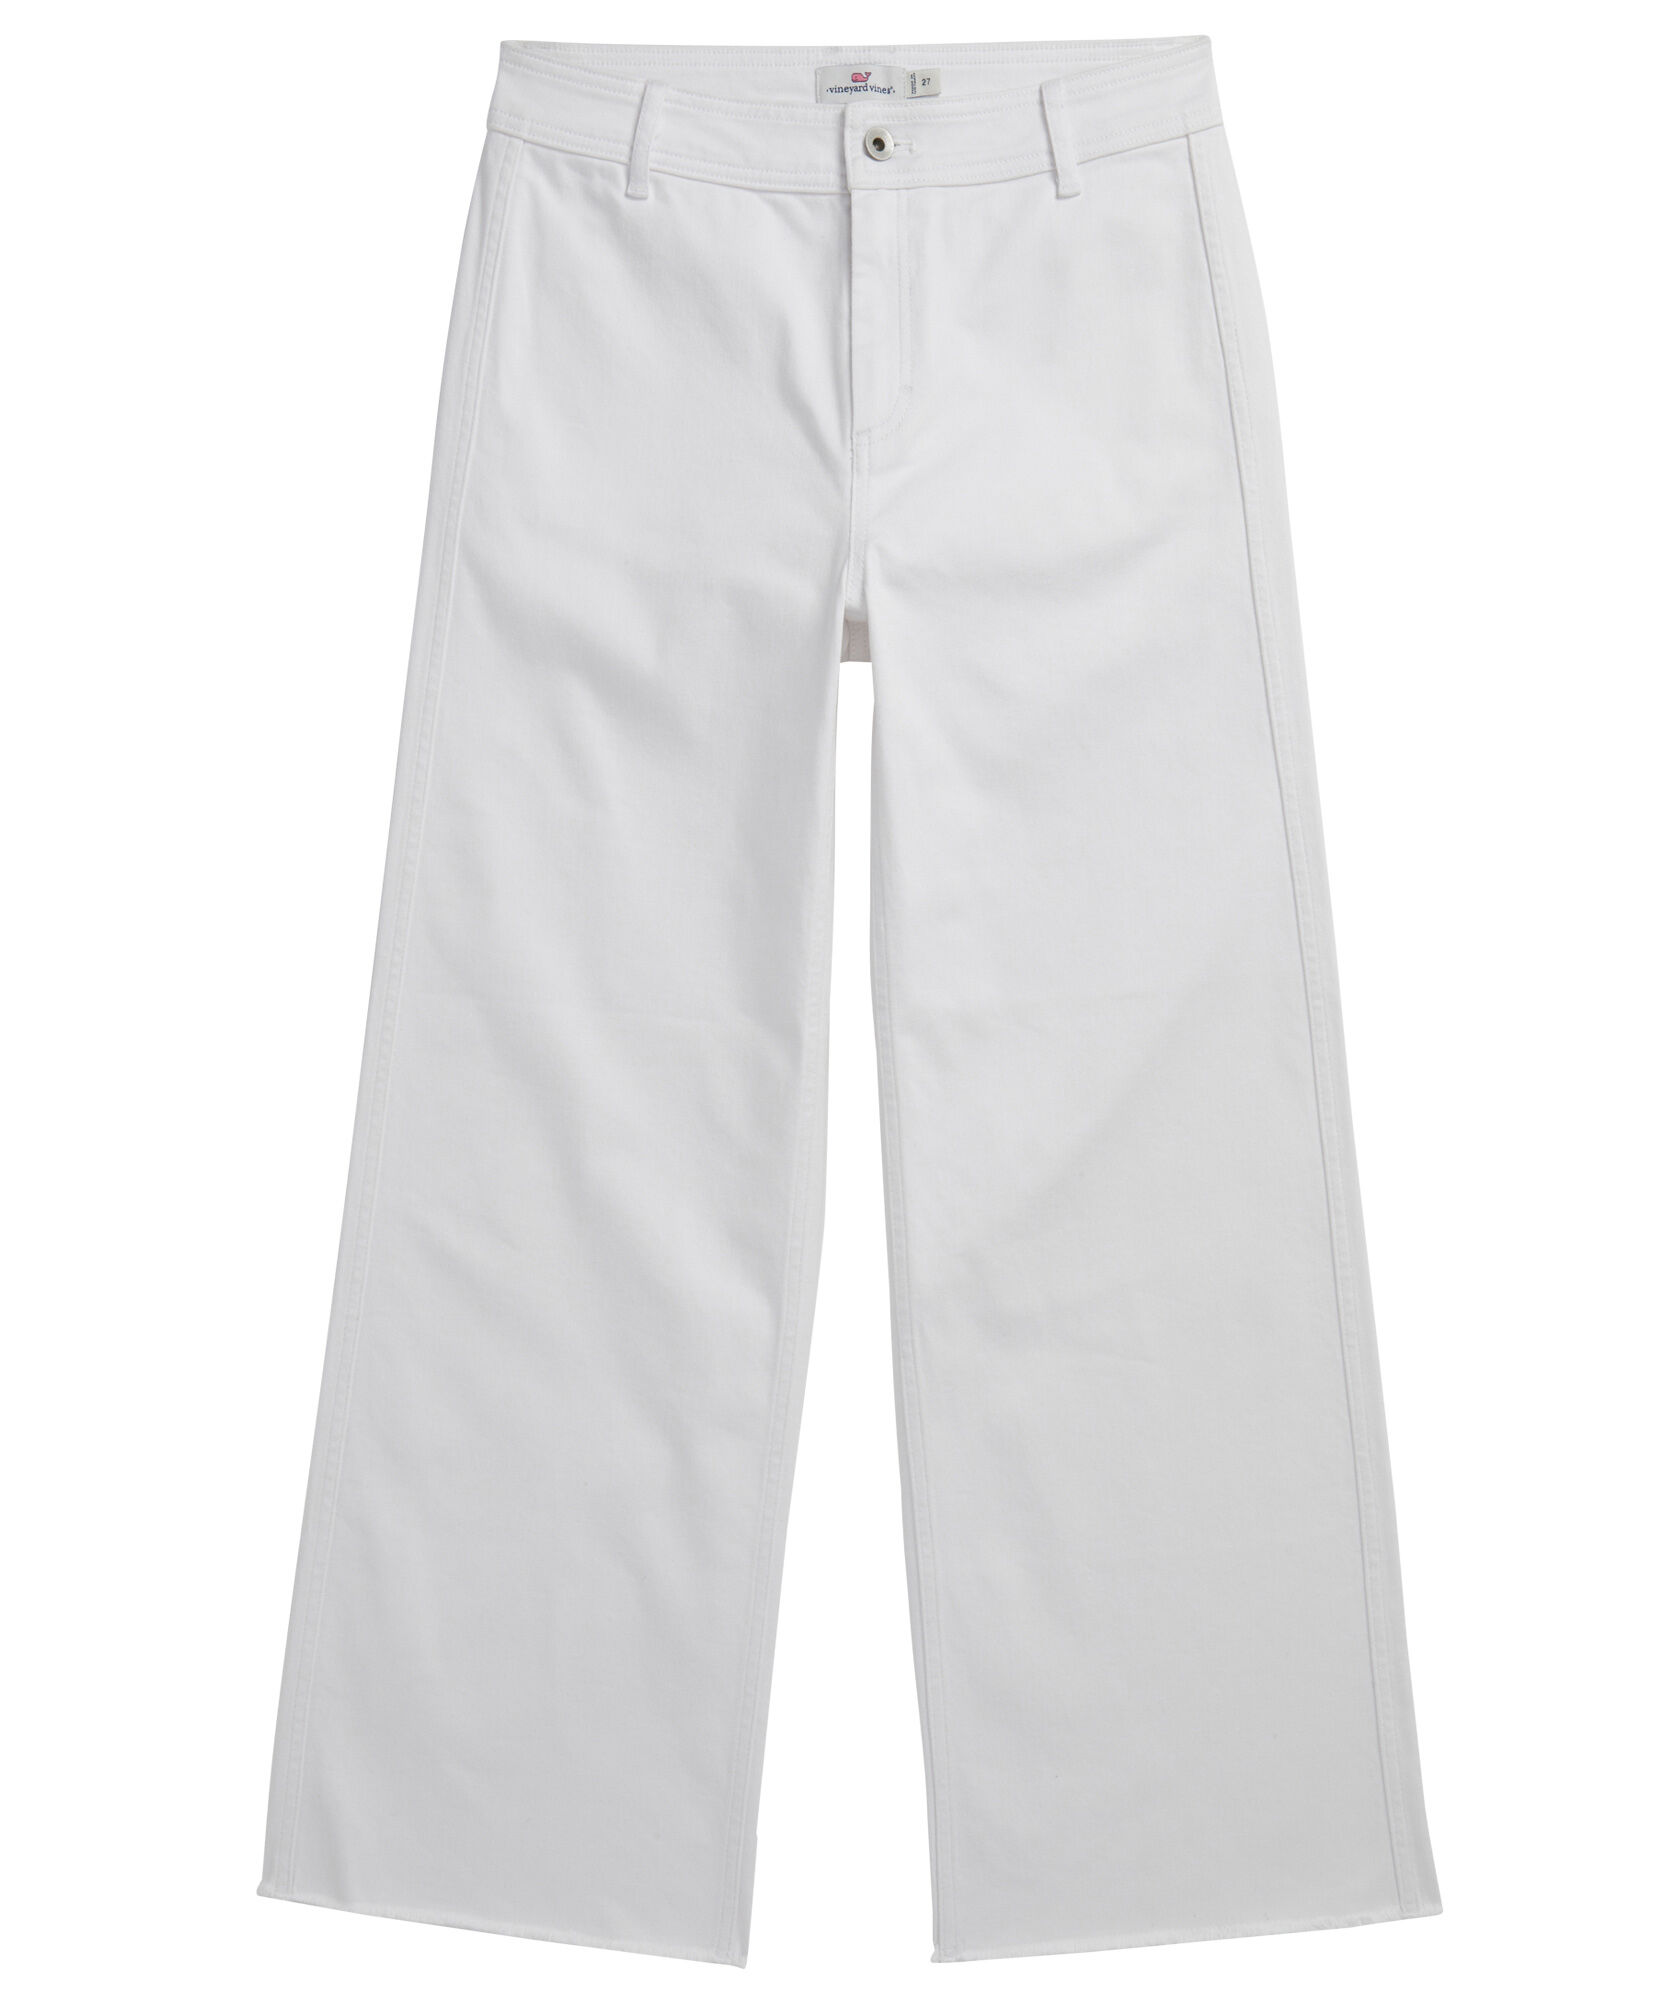 OUTLET Wide Leg White Jeans